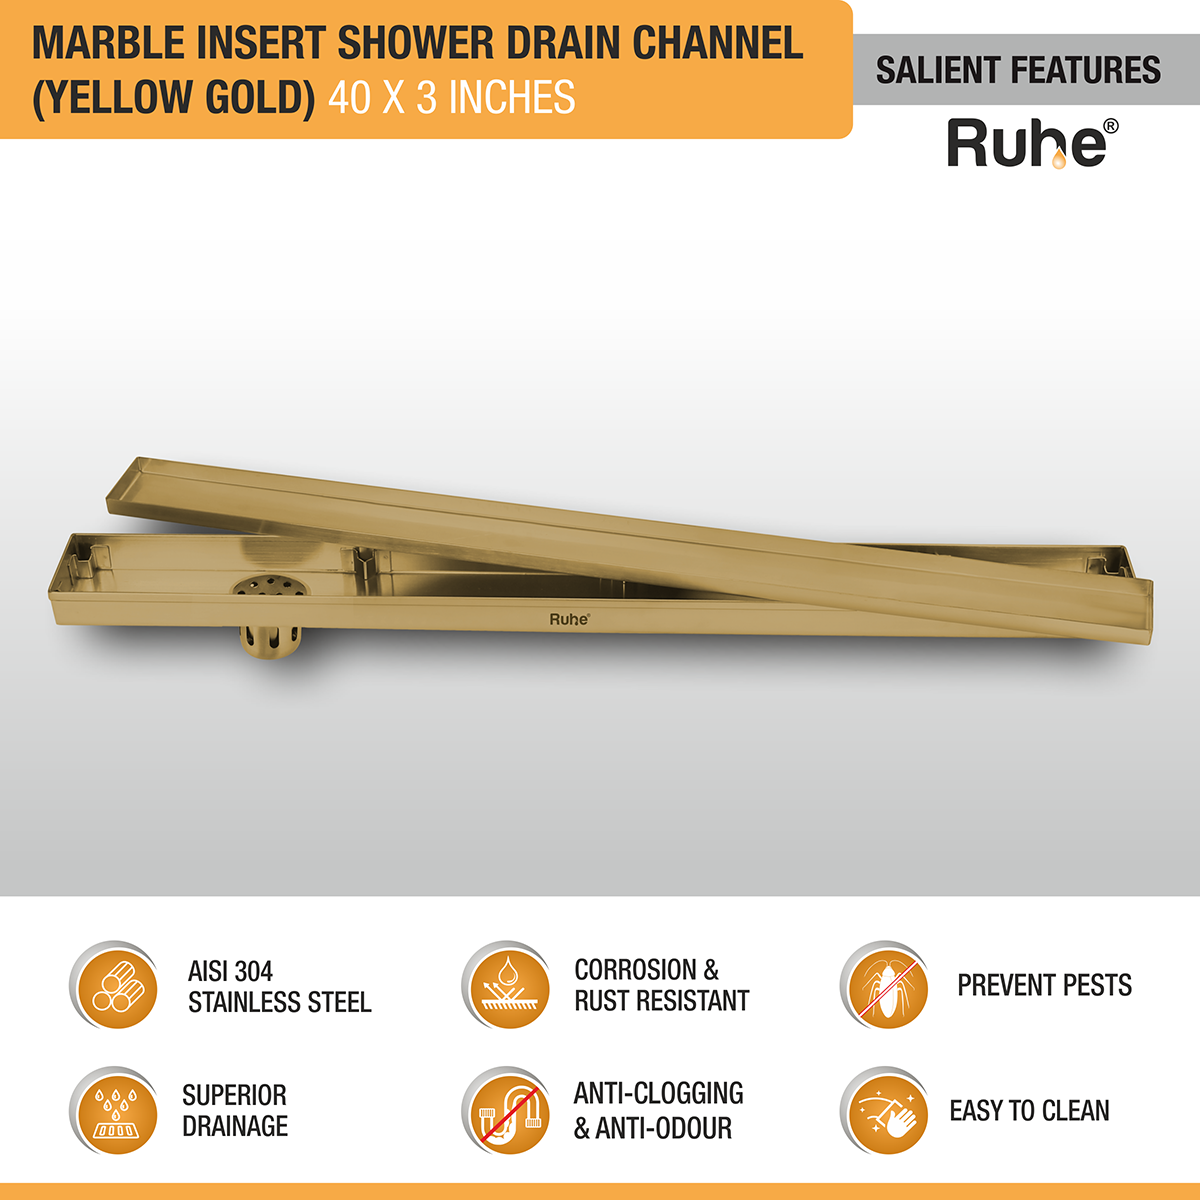 Marble Insert Shower Drain Channel (40 x 3 Inches) YELLOW GOLD PVD Coated features and benefits